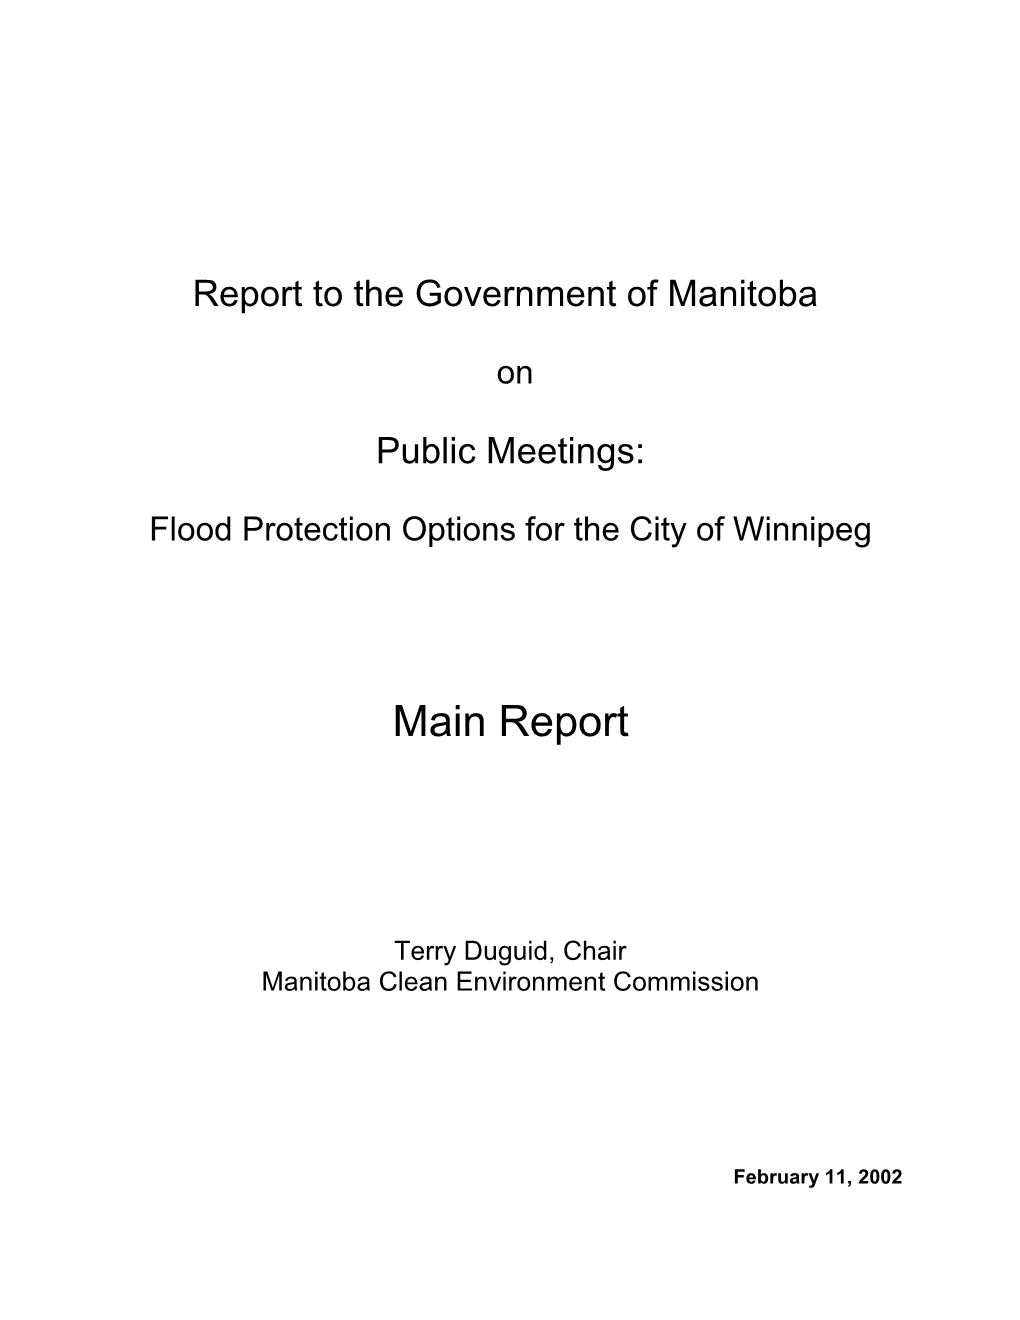 Flood Protection Options for the City of Winnipeg